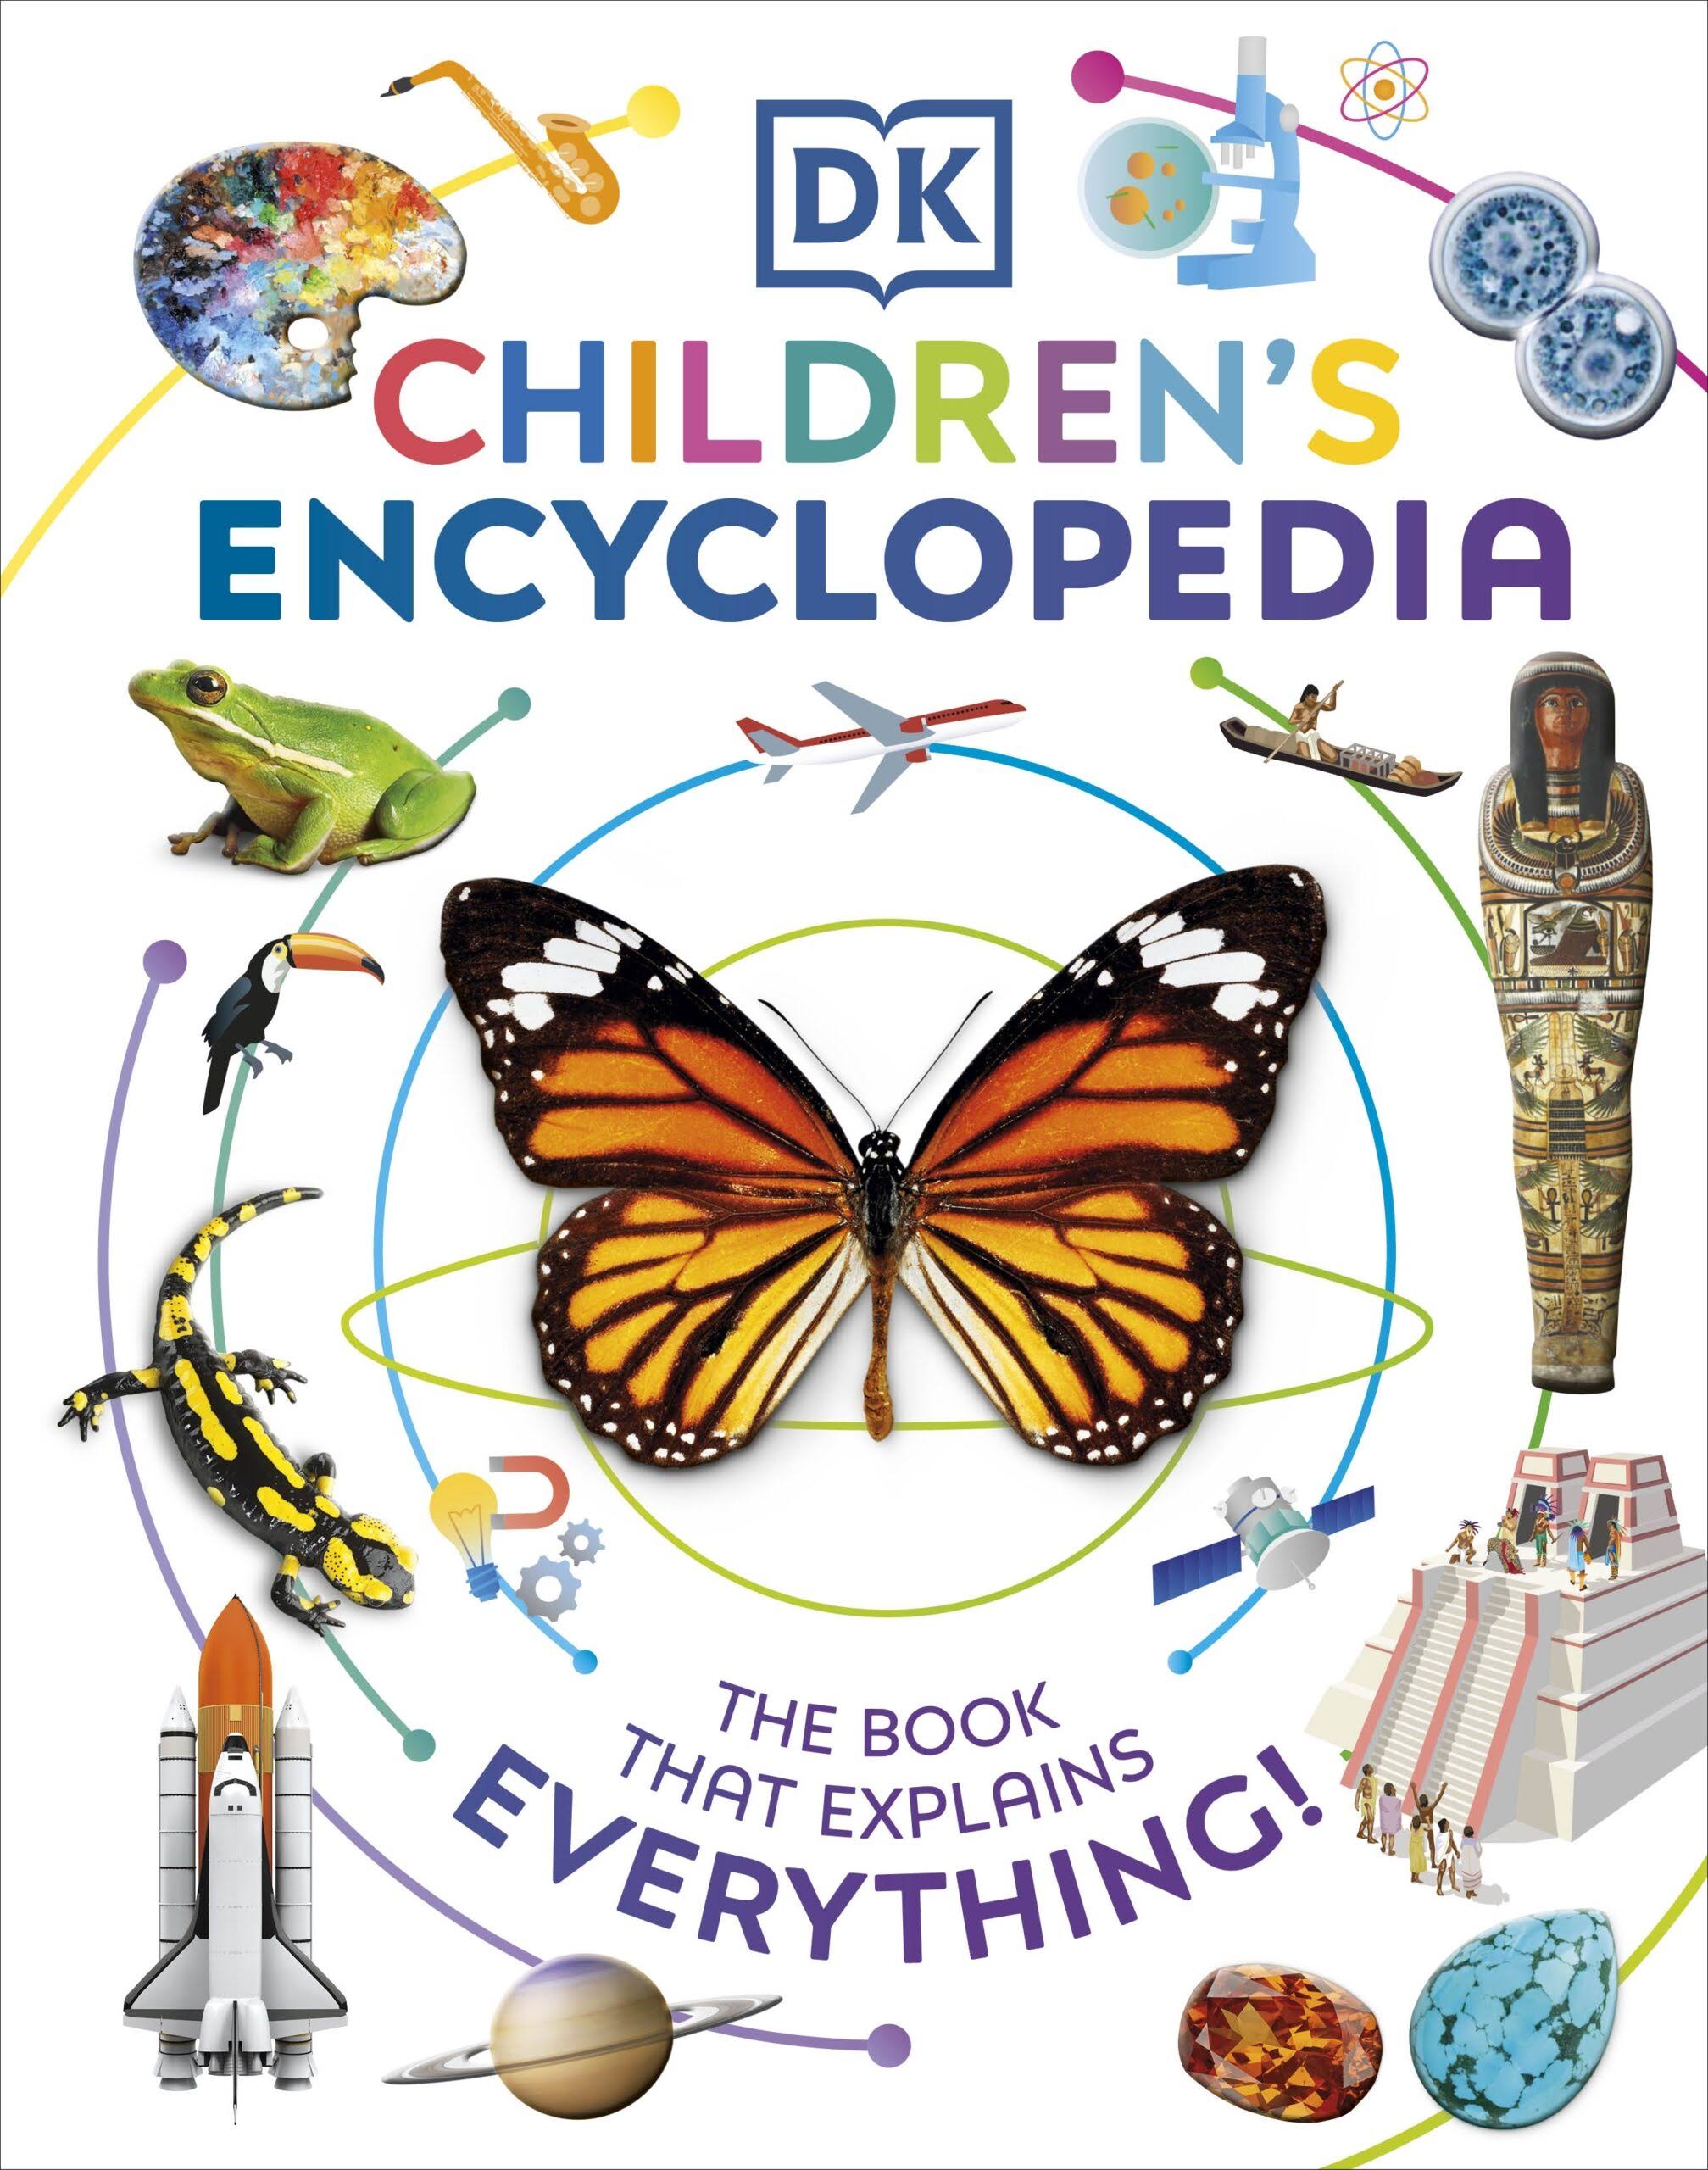 DK Children's Encyclopedia: The Book That Explains Everything [Book]